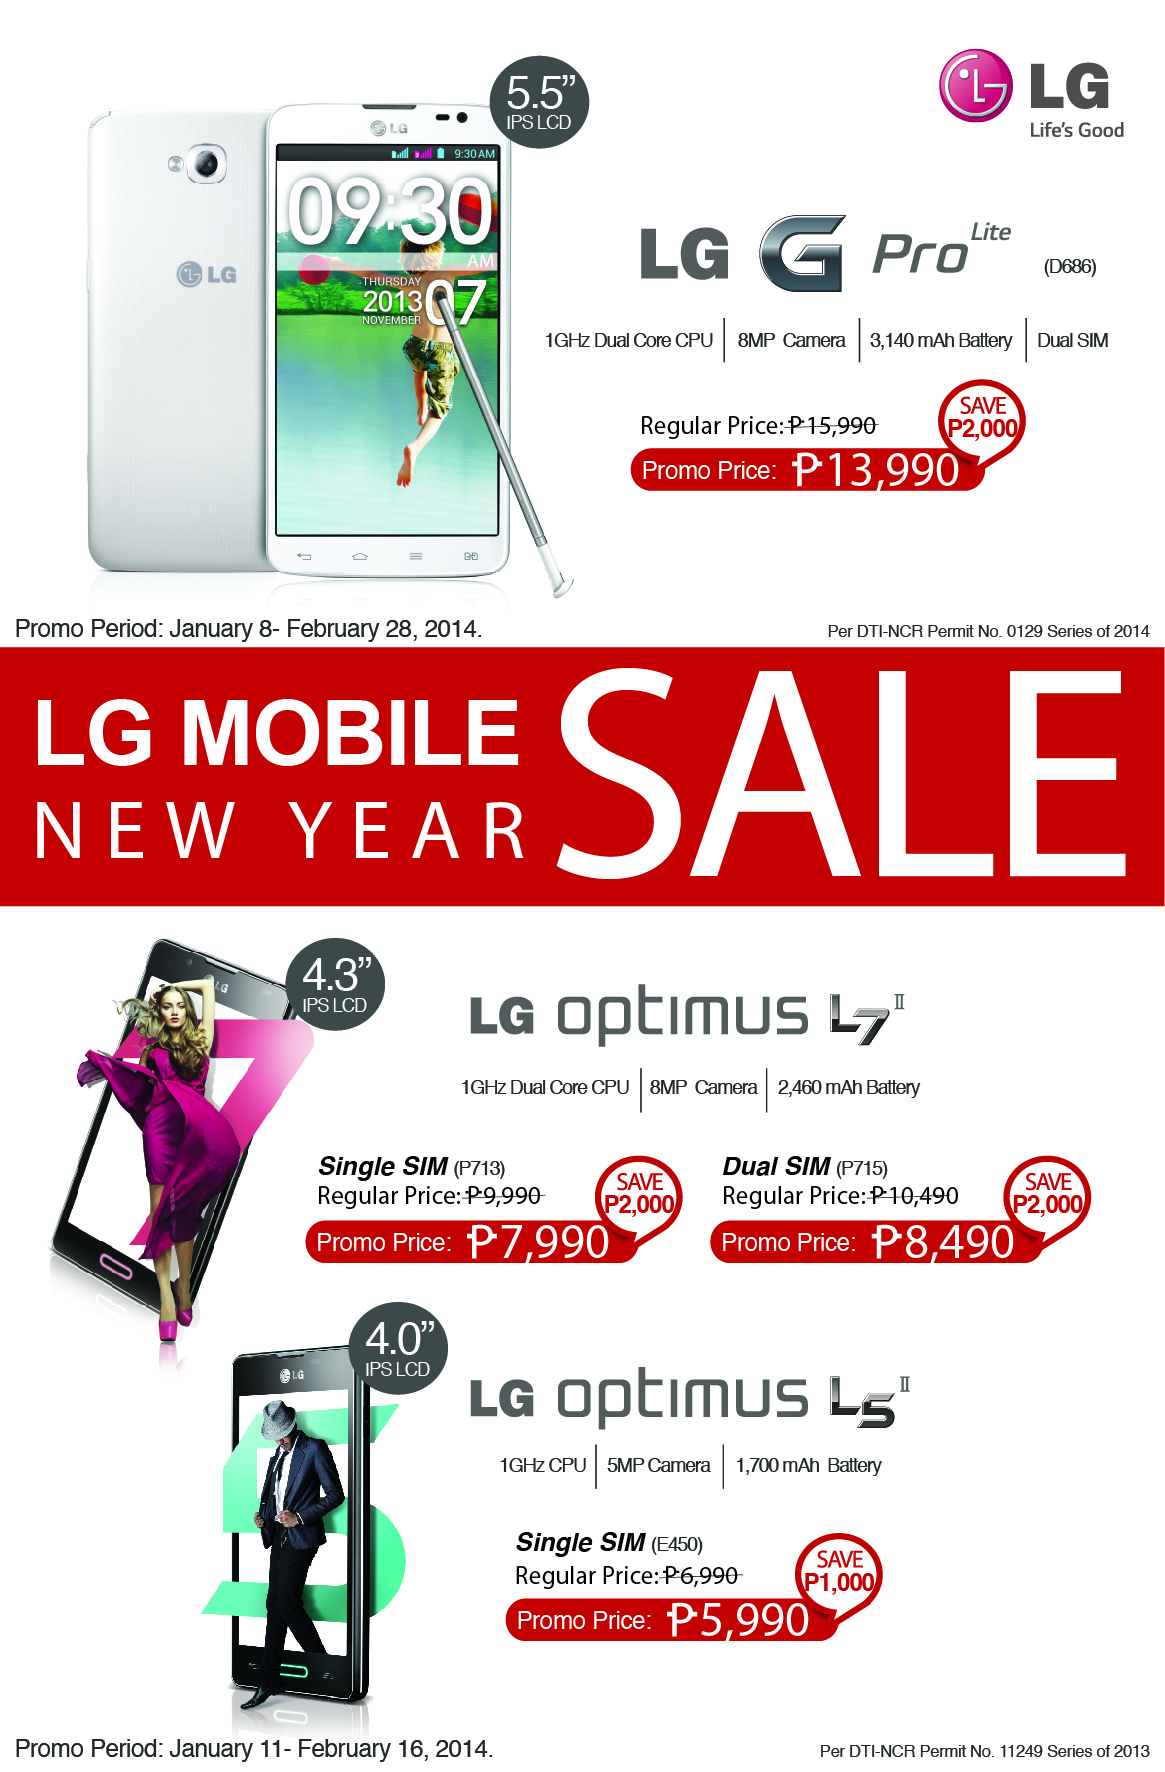 LG Mobile Kicks Off 2014 with New Year Promo